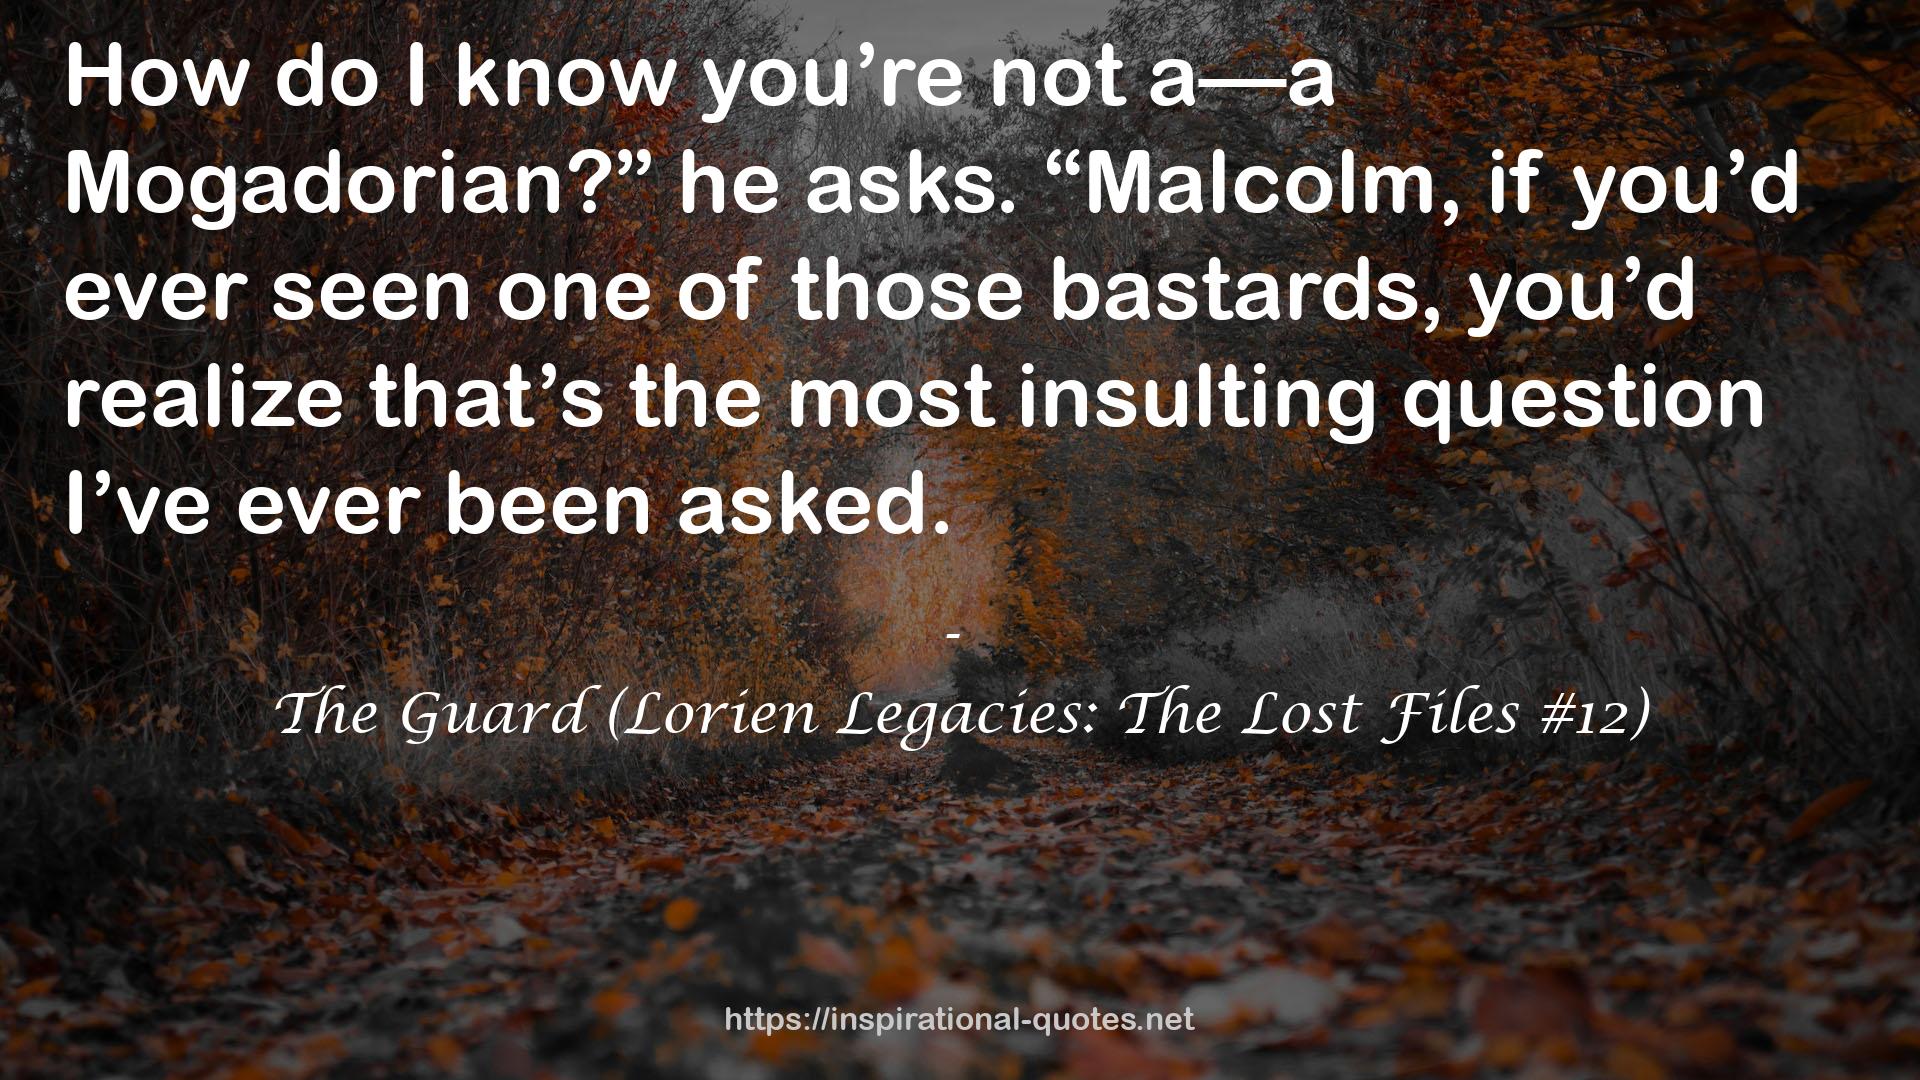 The Guard (Lorien Legacies: The Lost Files #12) QUOTES